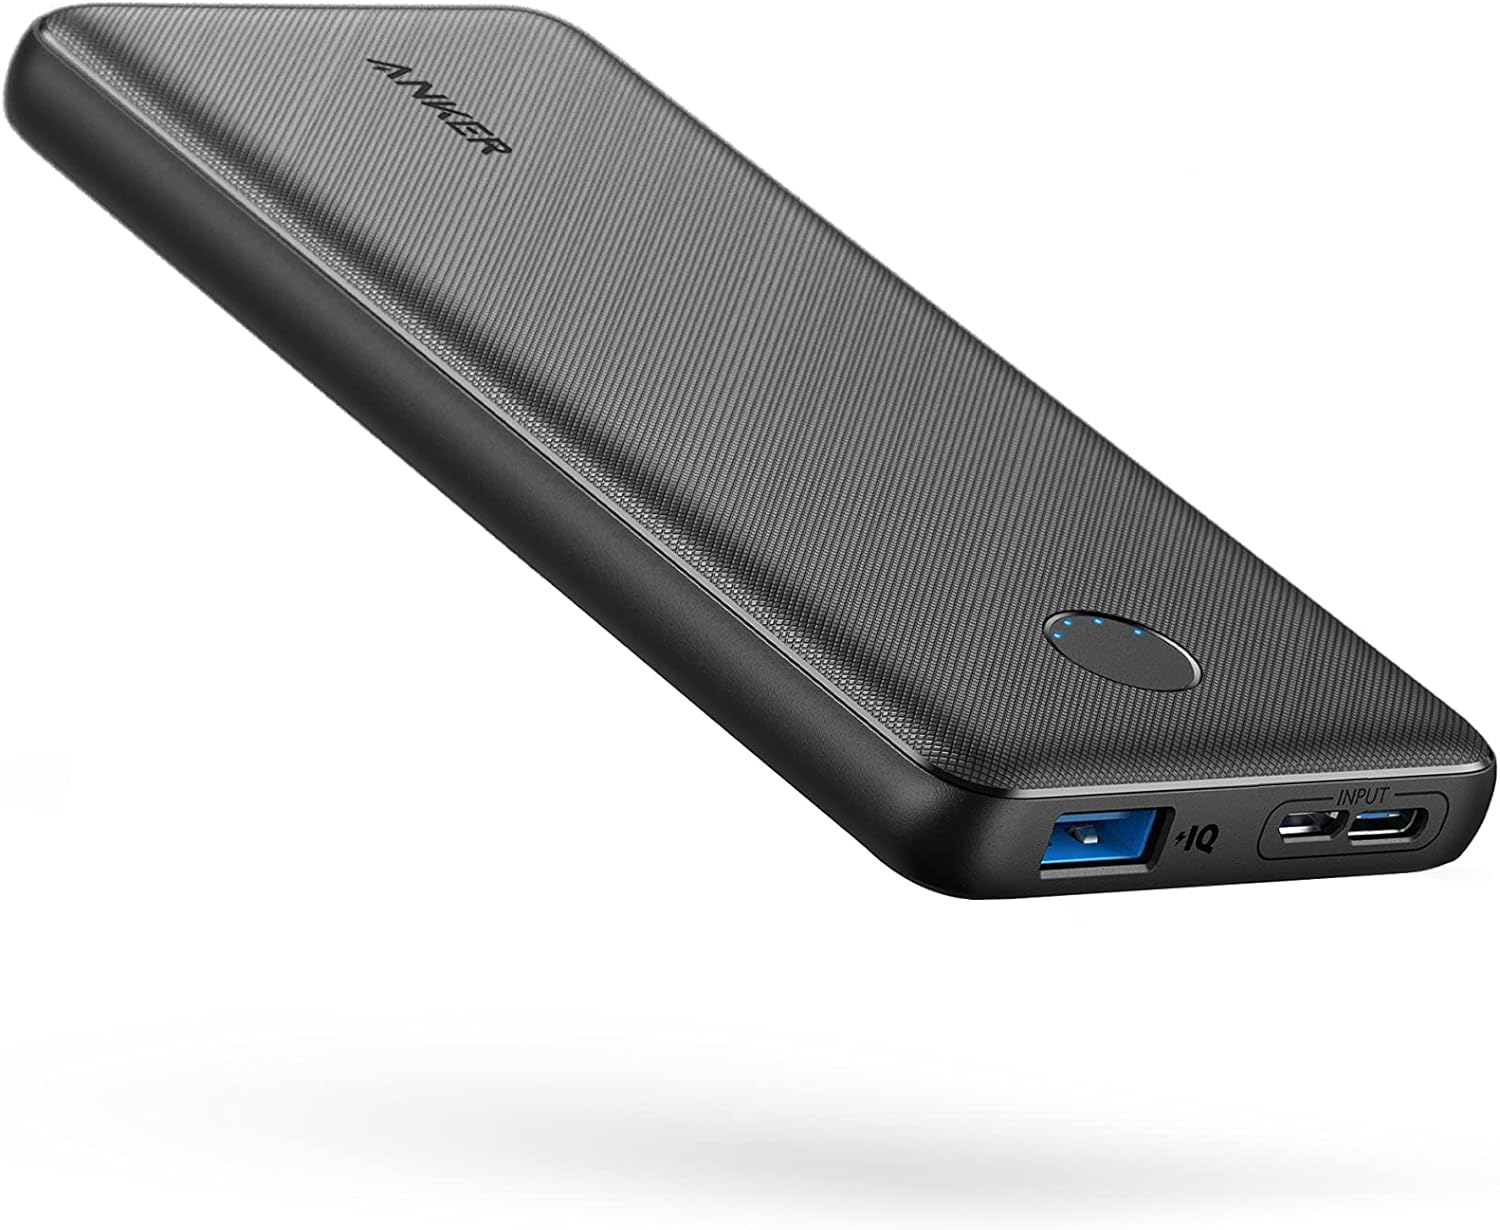 Anker Portable Charger, Power Bank, 10,000 mAh Battery Pack with PowerIQ Charging Technology and USB